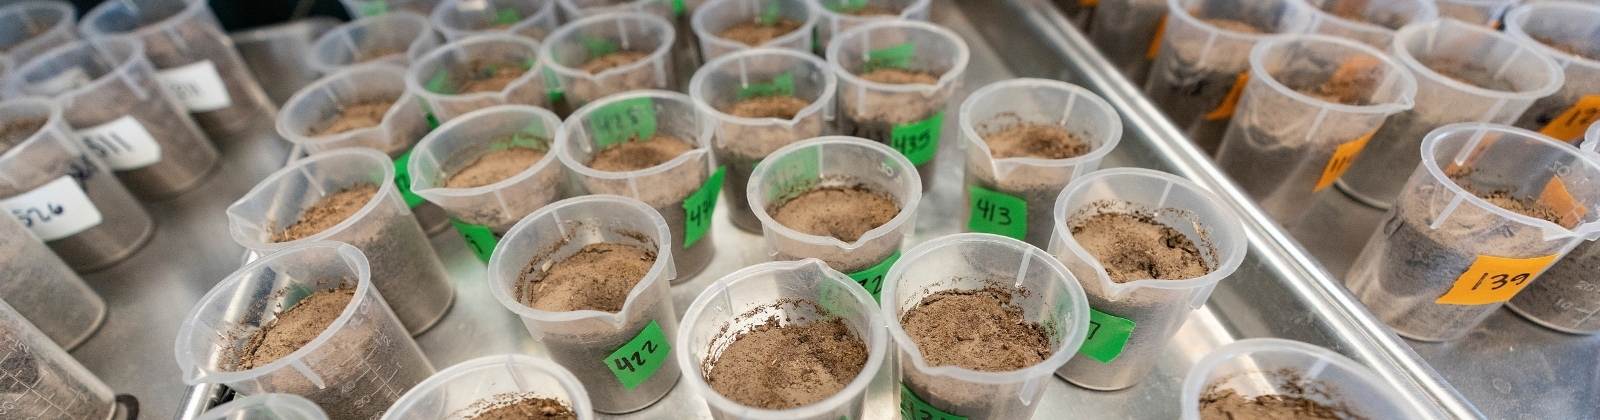 Several beakers of soil samples placed on a tray